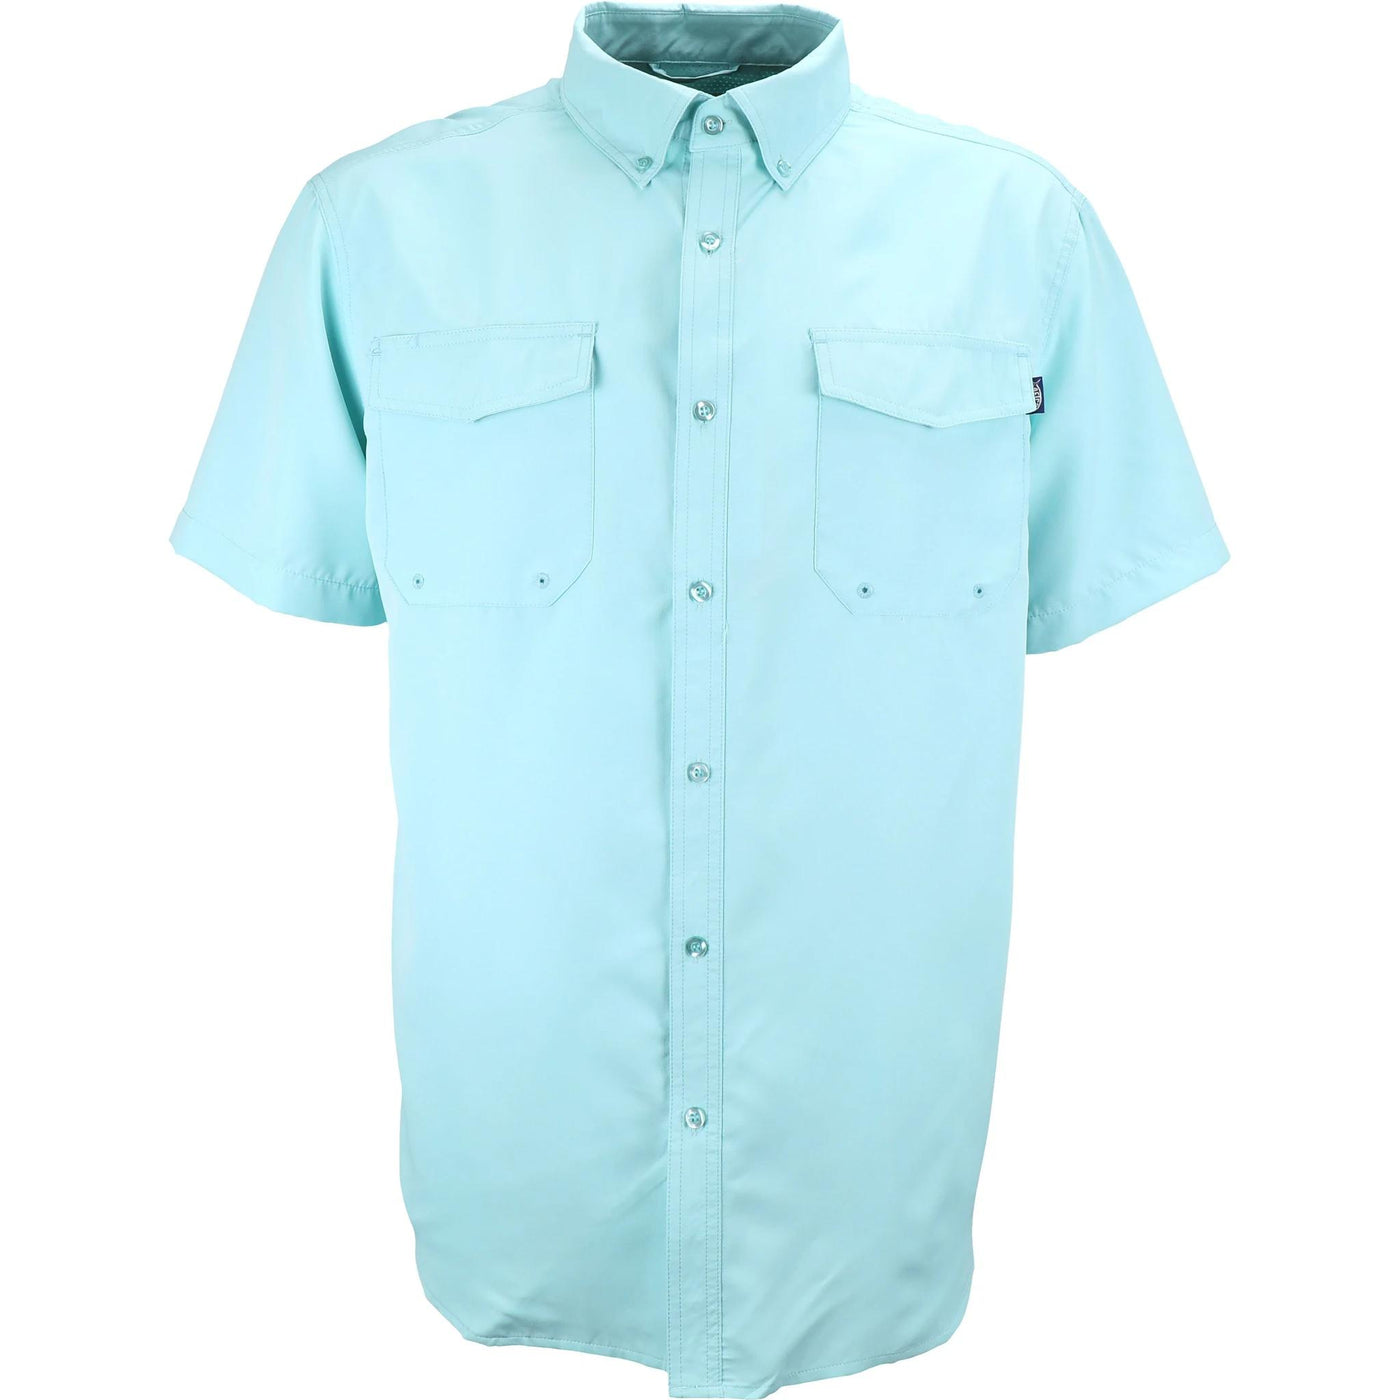 Aftco Sonar Short Sleeve Button Down Shirt-MENS CLOTHING-Sonar-S-Kevin's Fine Outdoor Gear & Apparel